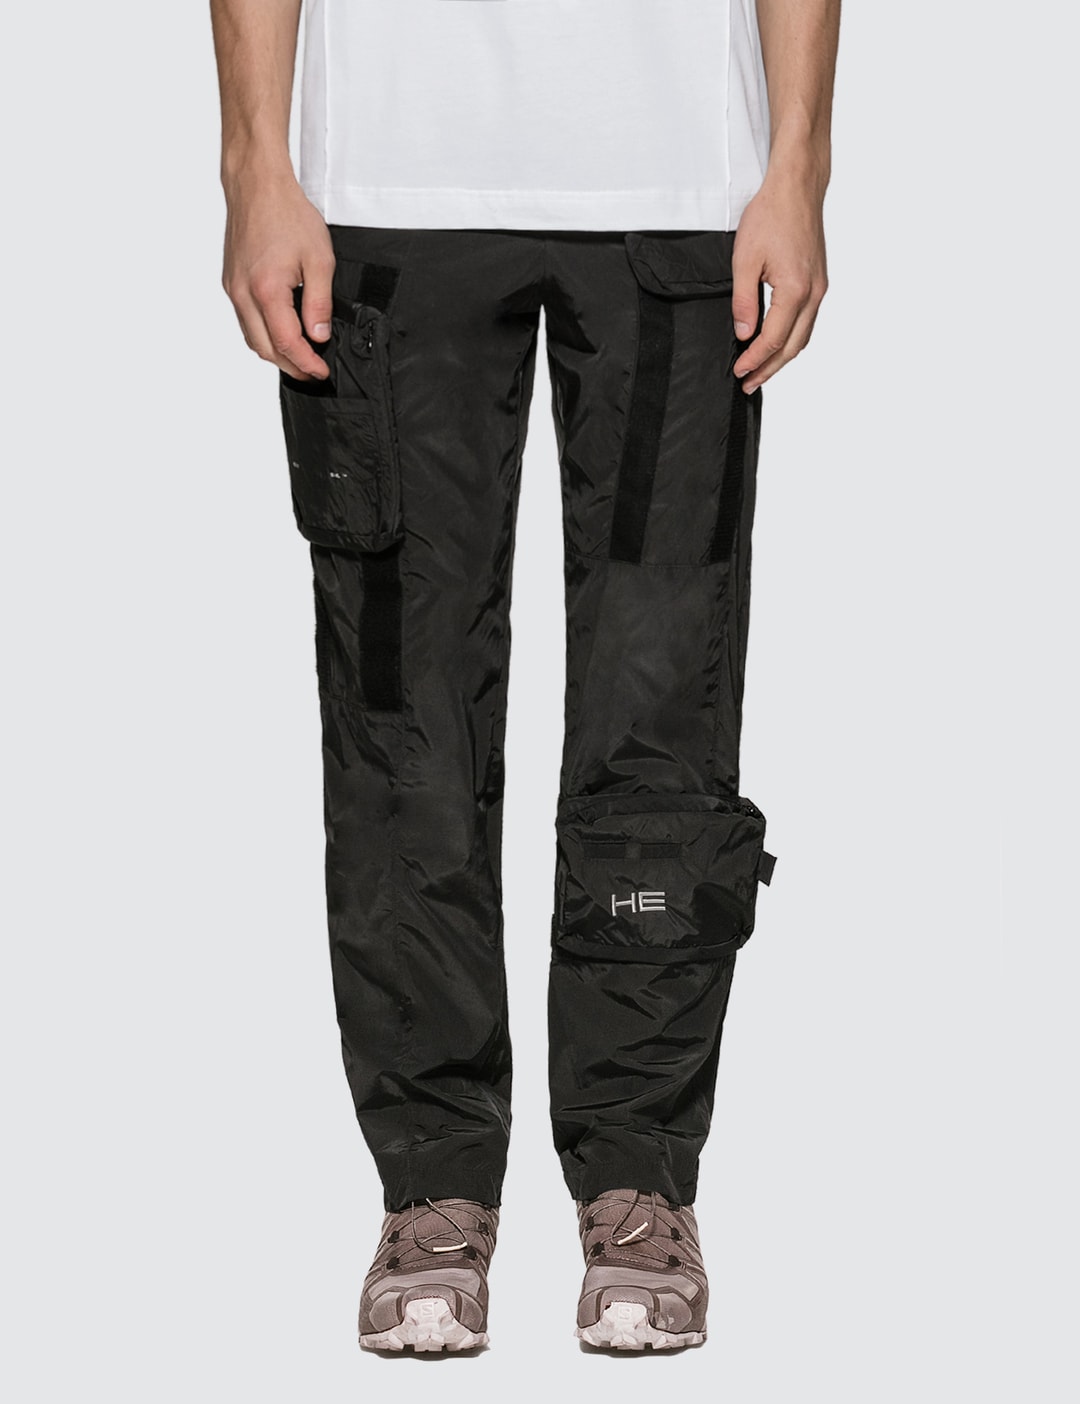 Heliot Emil - Magnets Cargo Pants | HBX - Globally Curated Fashion and ...